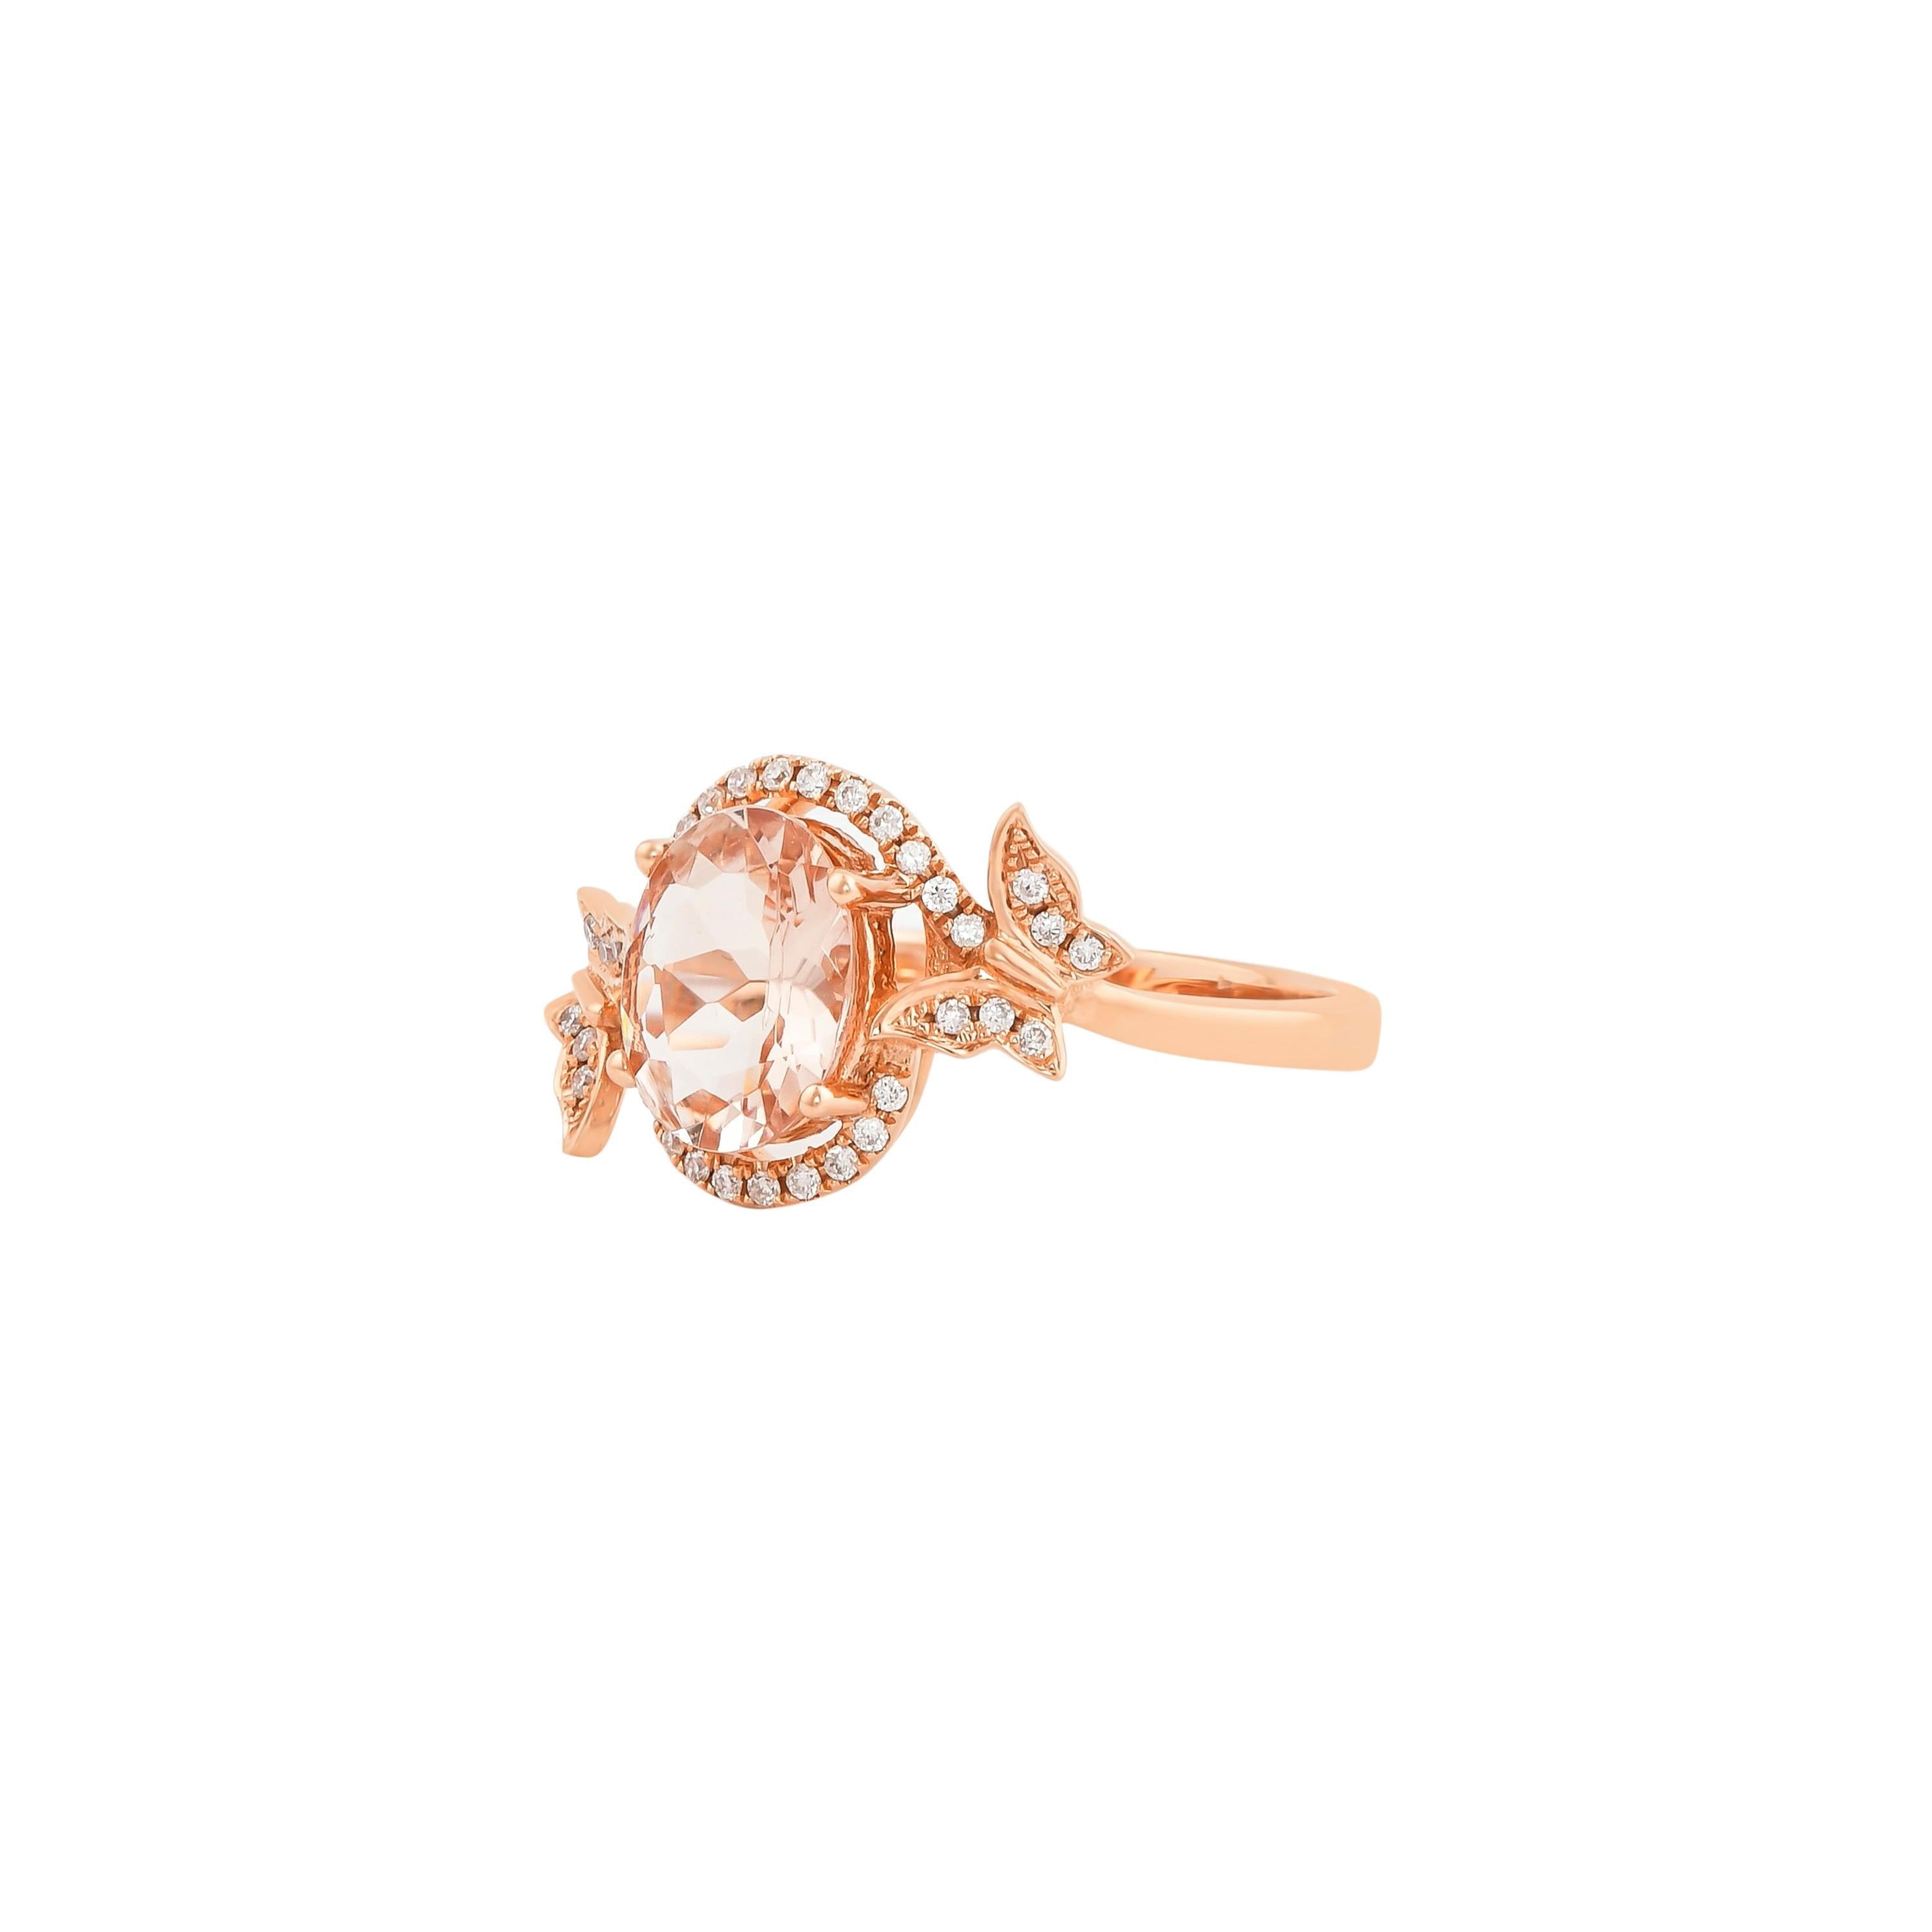 Contemporary 1.32 Carat Morganite and Diamond Ring in 18 Karat Rose Gold For Sale